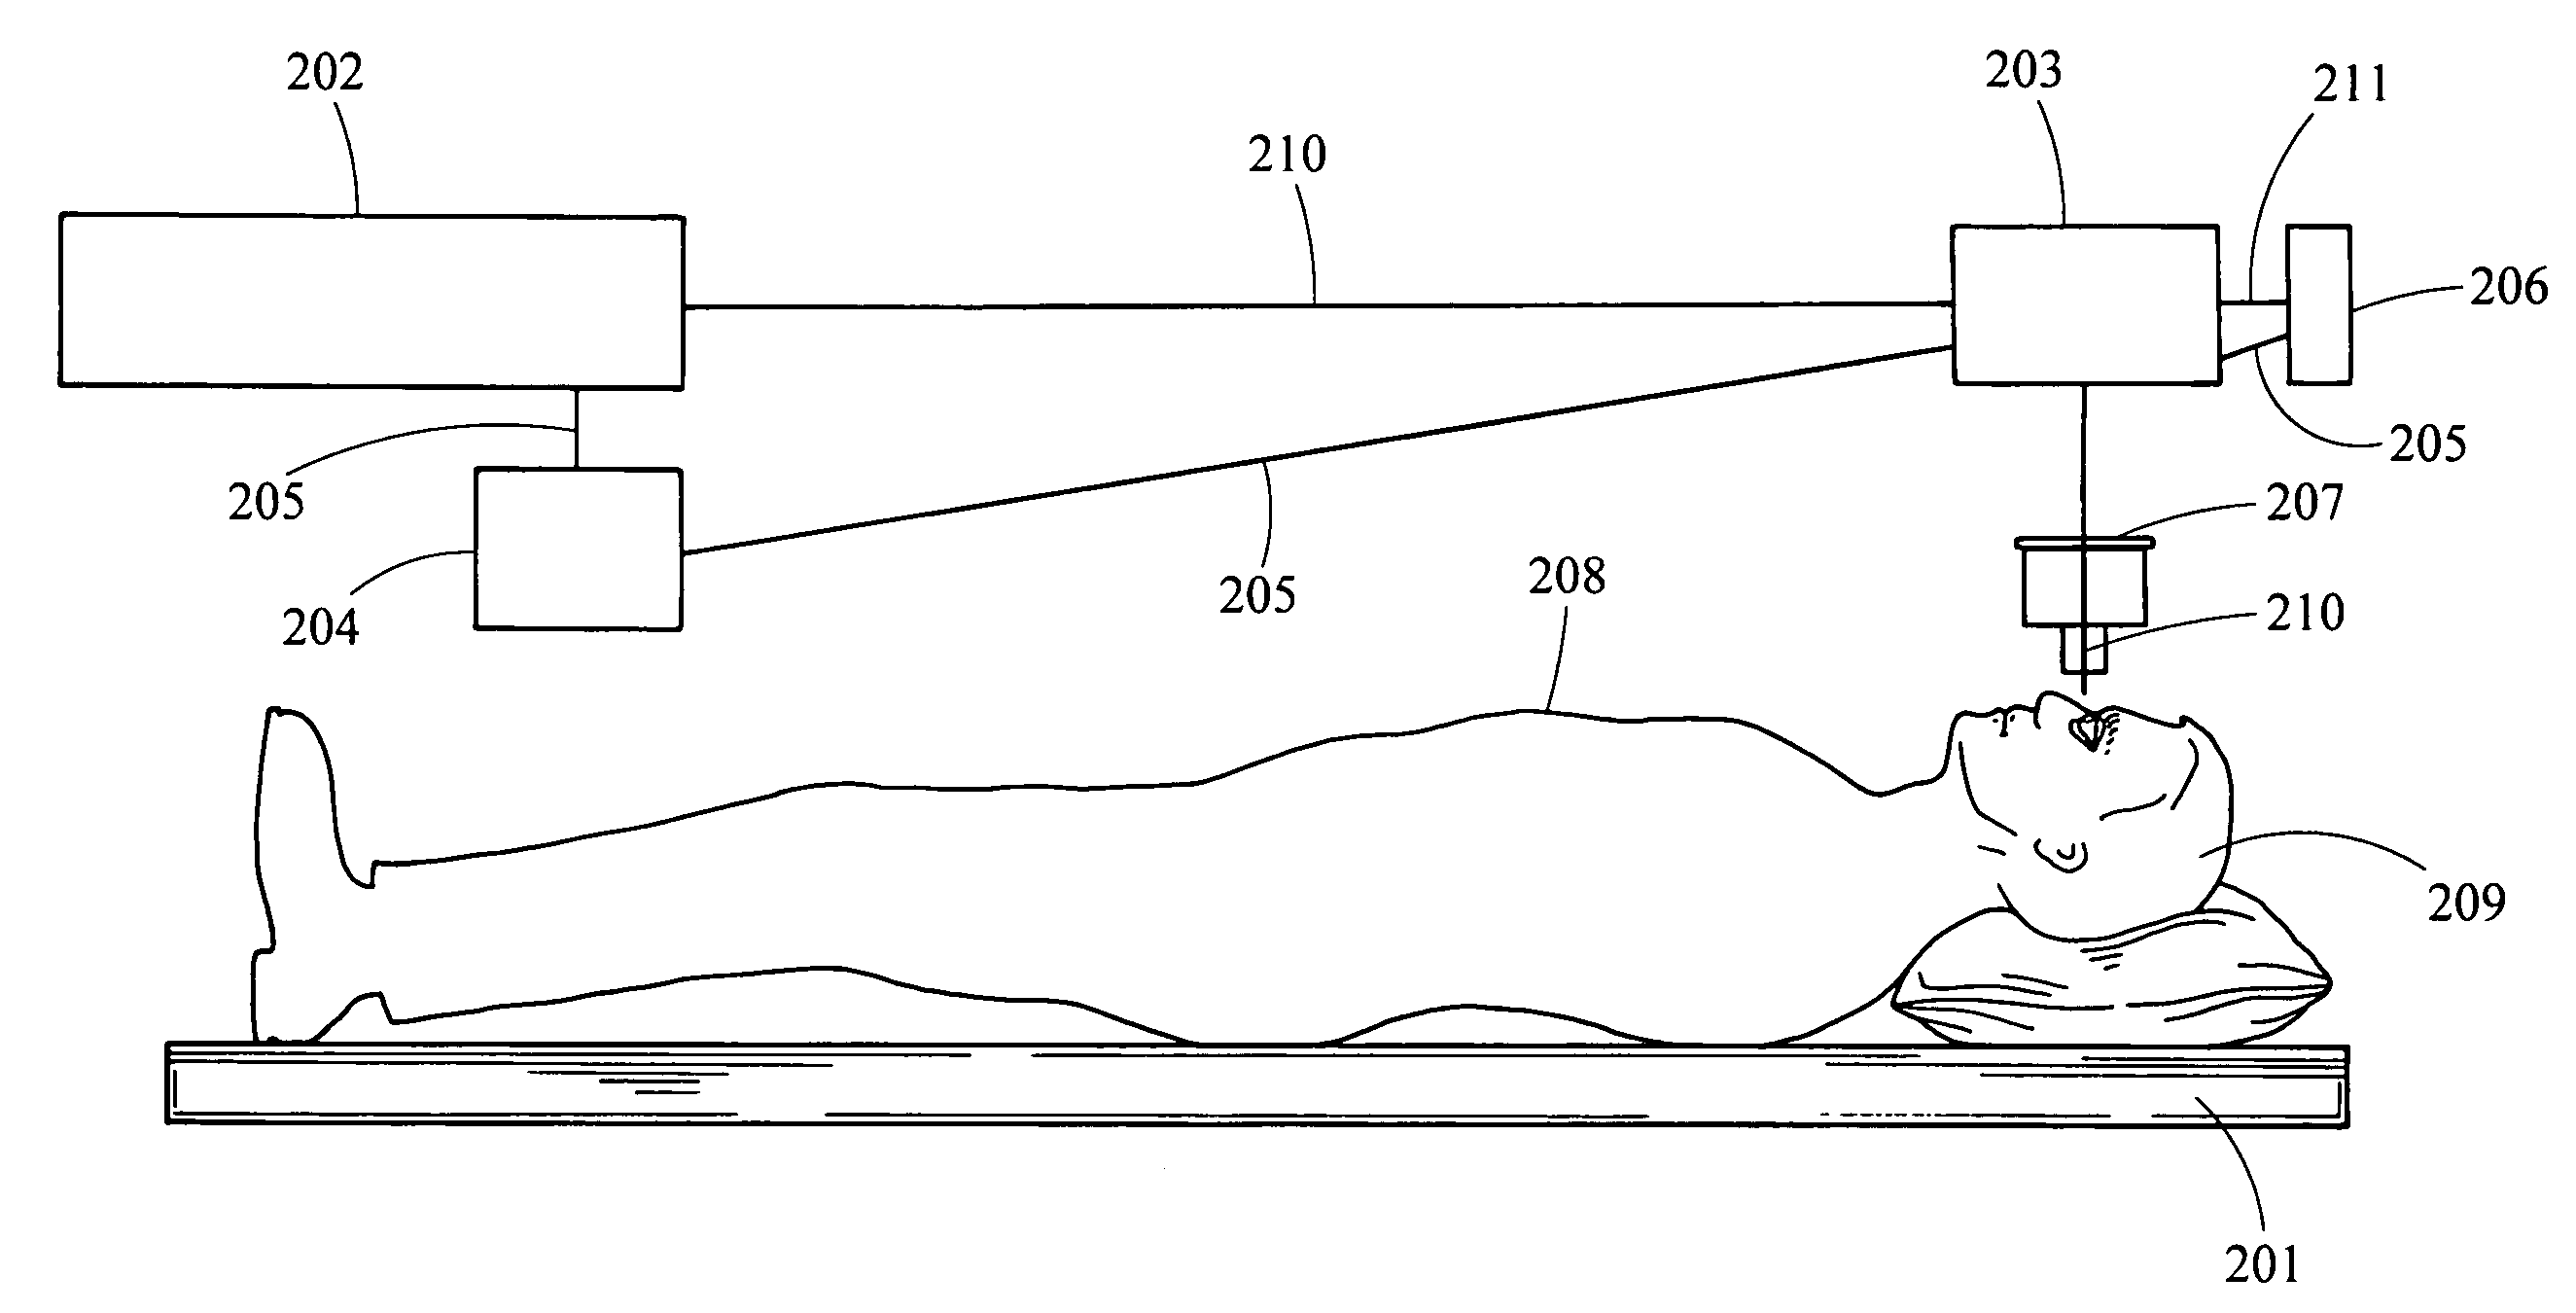 System and method for providing the shaped structural weakening of the human lens with a laser